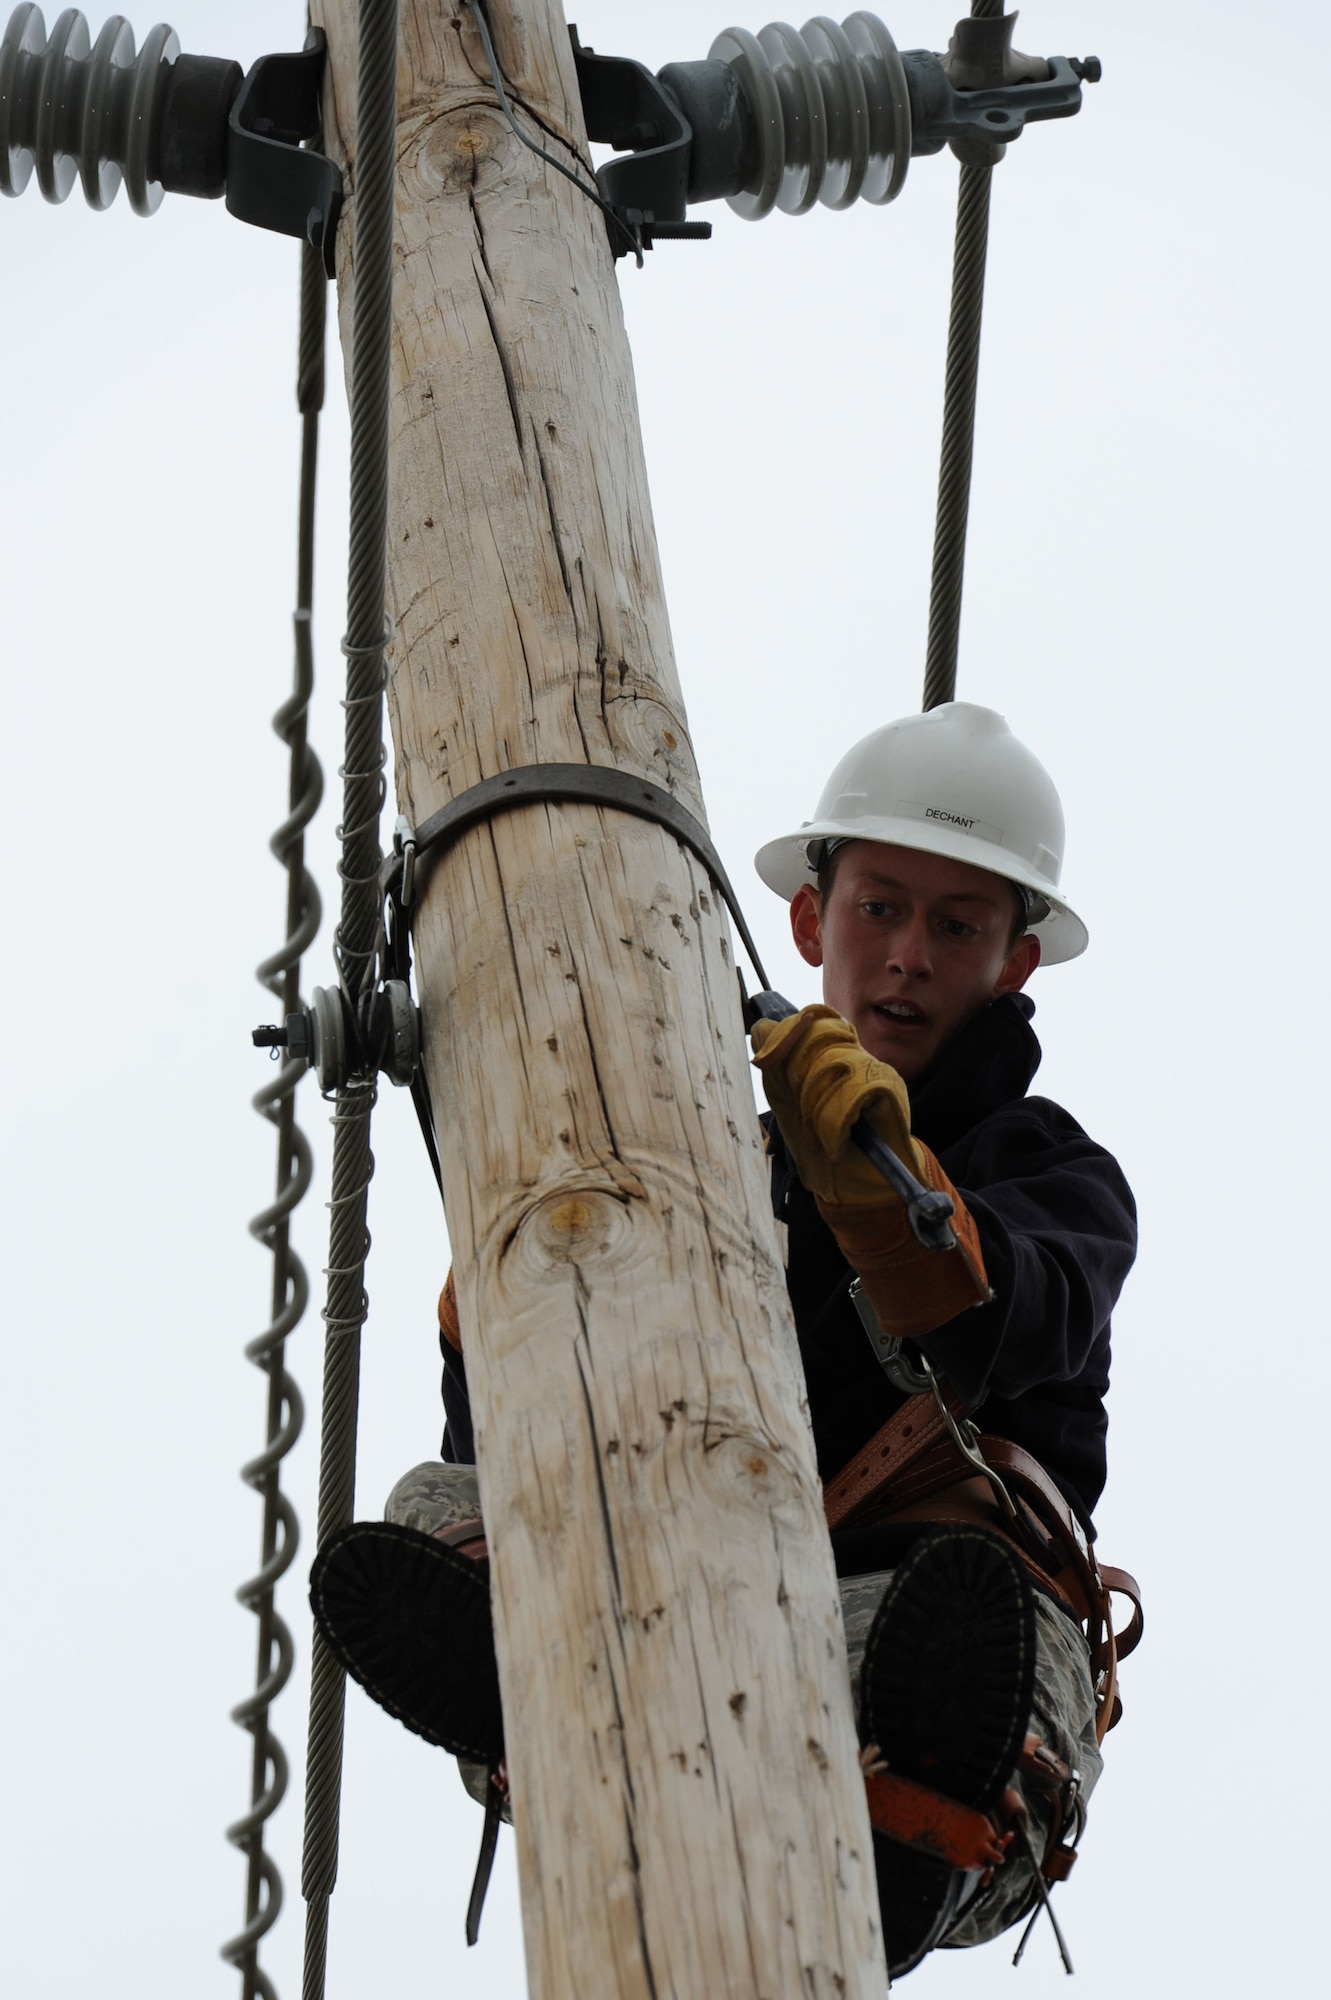 Airman 1st Class Daniel Dechant, 28th Civil Engineer Squadron electrical systems journeyman, tightens conductors on a utility pole during routine maintenance at Ellsworth Air Force Base, S.D., Sept. 9, 2014. Electrical systems Airmen perform annual preventive maintenance on utility poles which ensures that, when it snows, the weight of the snow has a lesser chance of tripping the circuit and cutting power to portions of the base. (U.S. Air Force photo by Senior Airman Hailey R. Staker/Released)